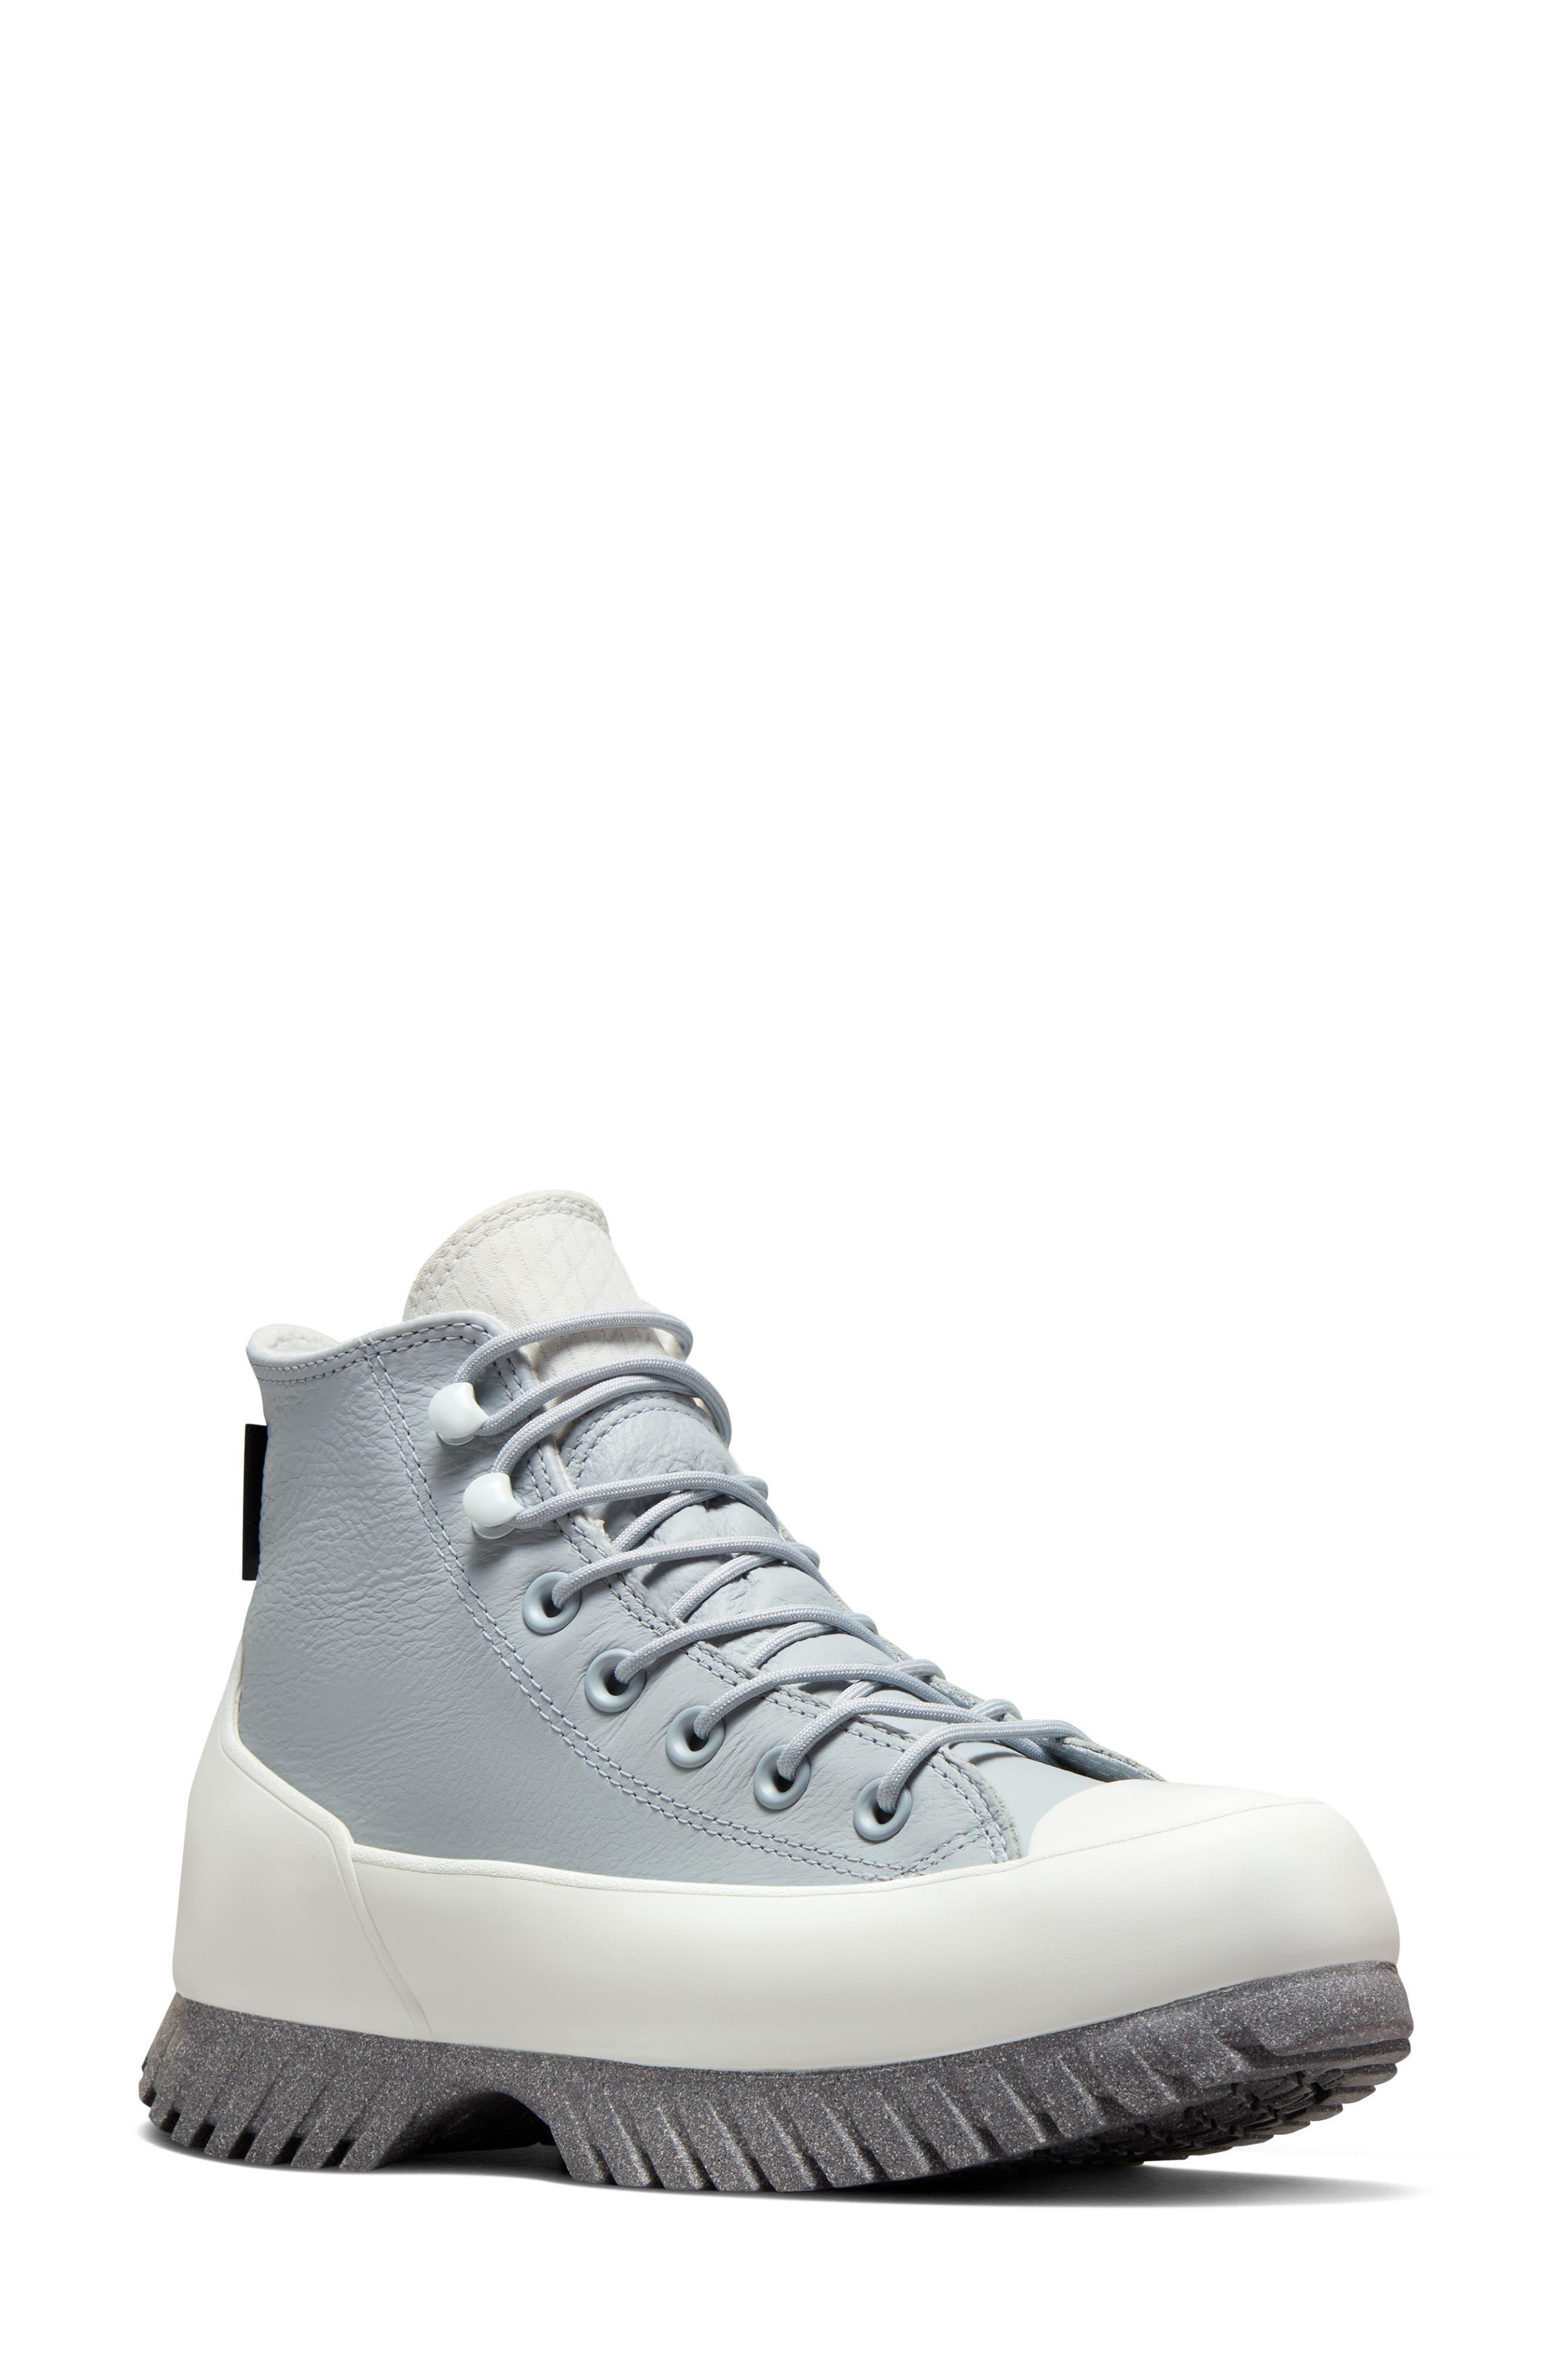 Converse Chuck Taylor All Star lugged 2.0 Waterproof Hi Sneaker in White |  Lyst